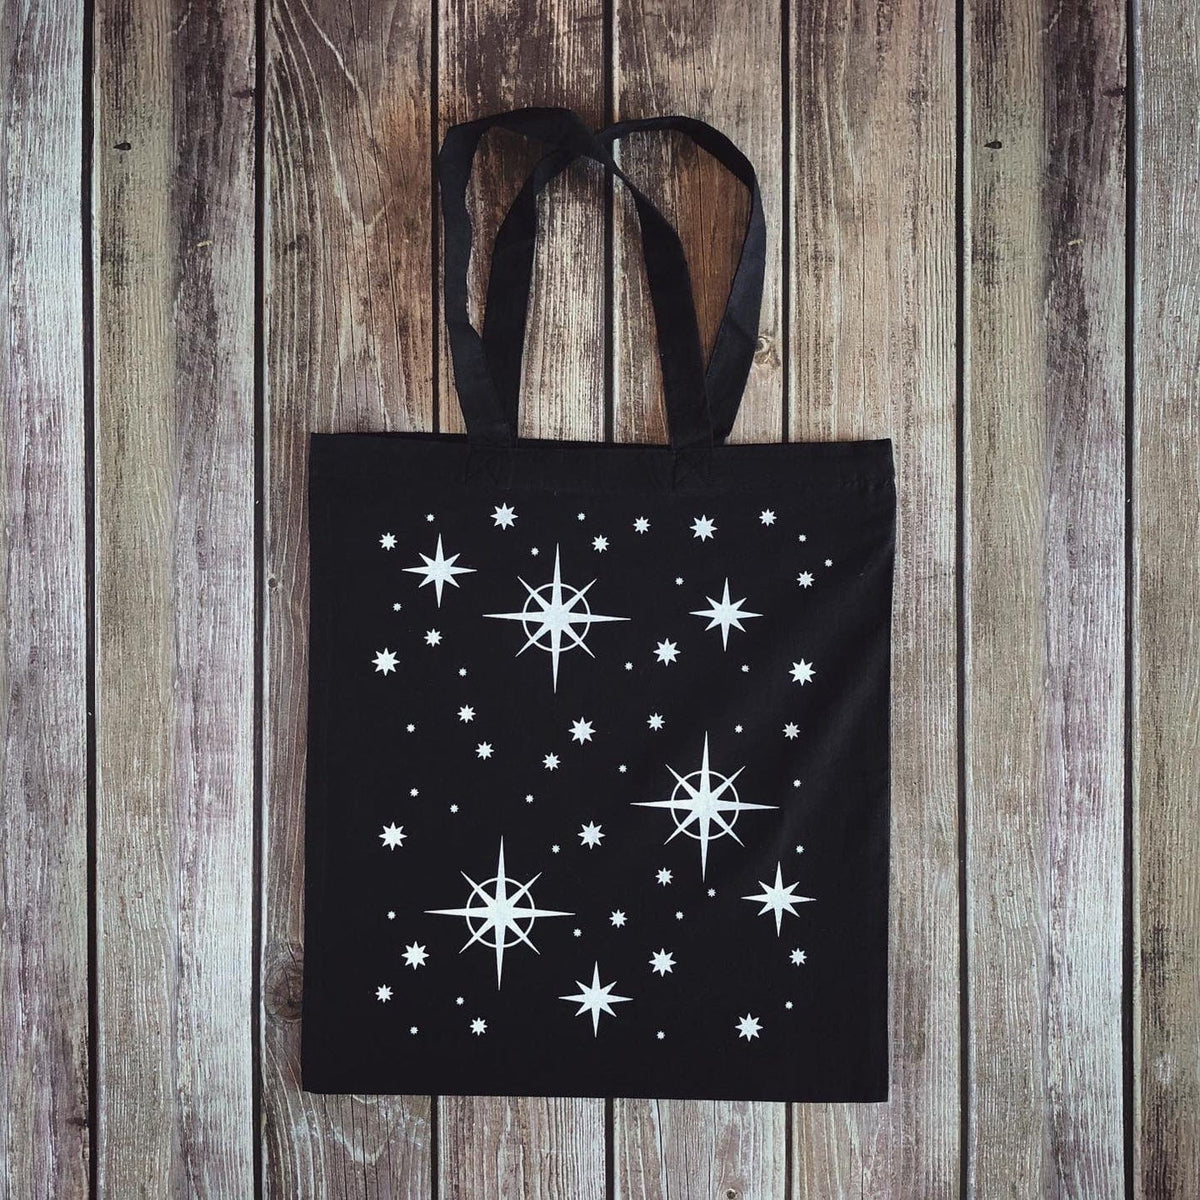 Fabled Creative Starry Night Tote